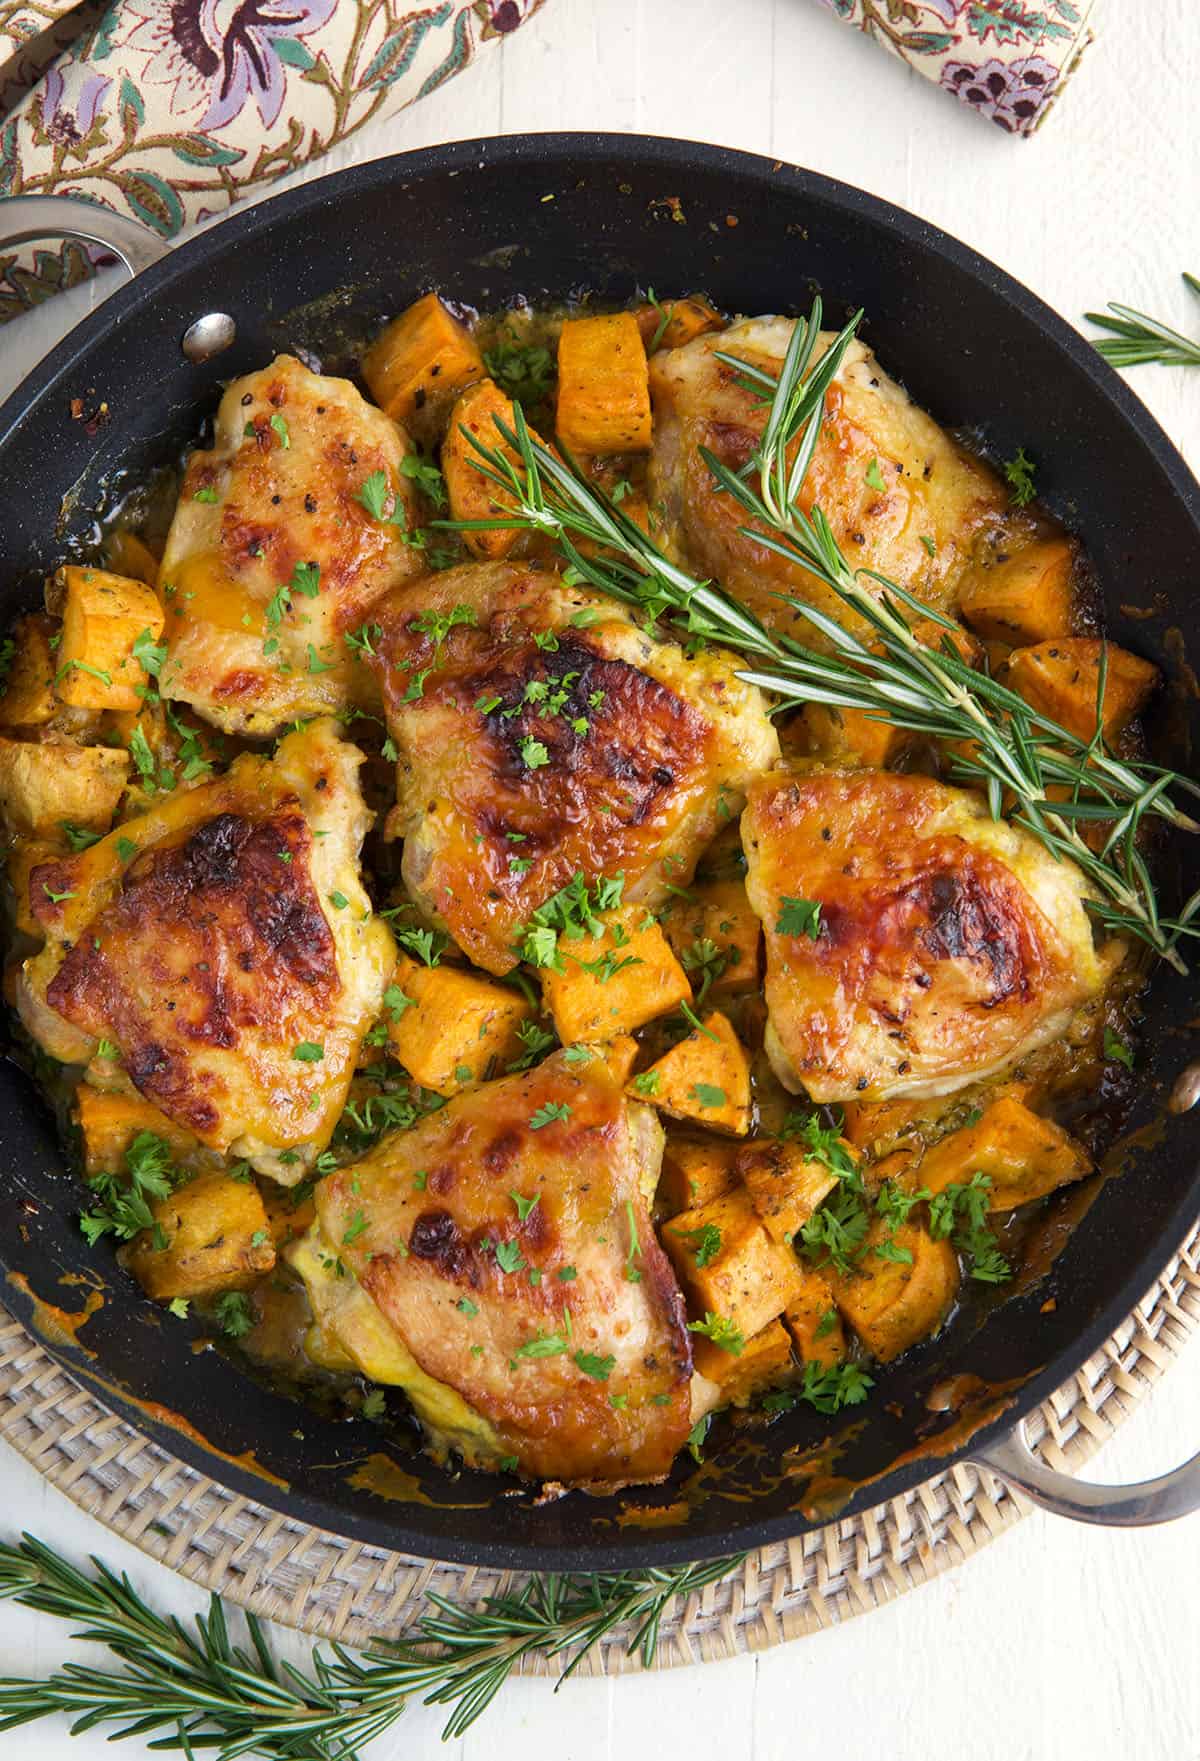 A black skillet is filled with herbs, chicken thighs and sweet potatoes.